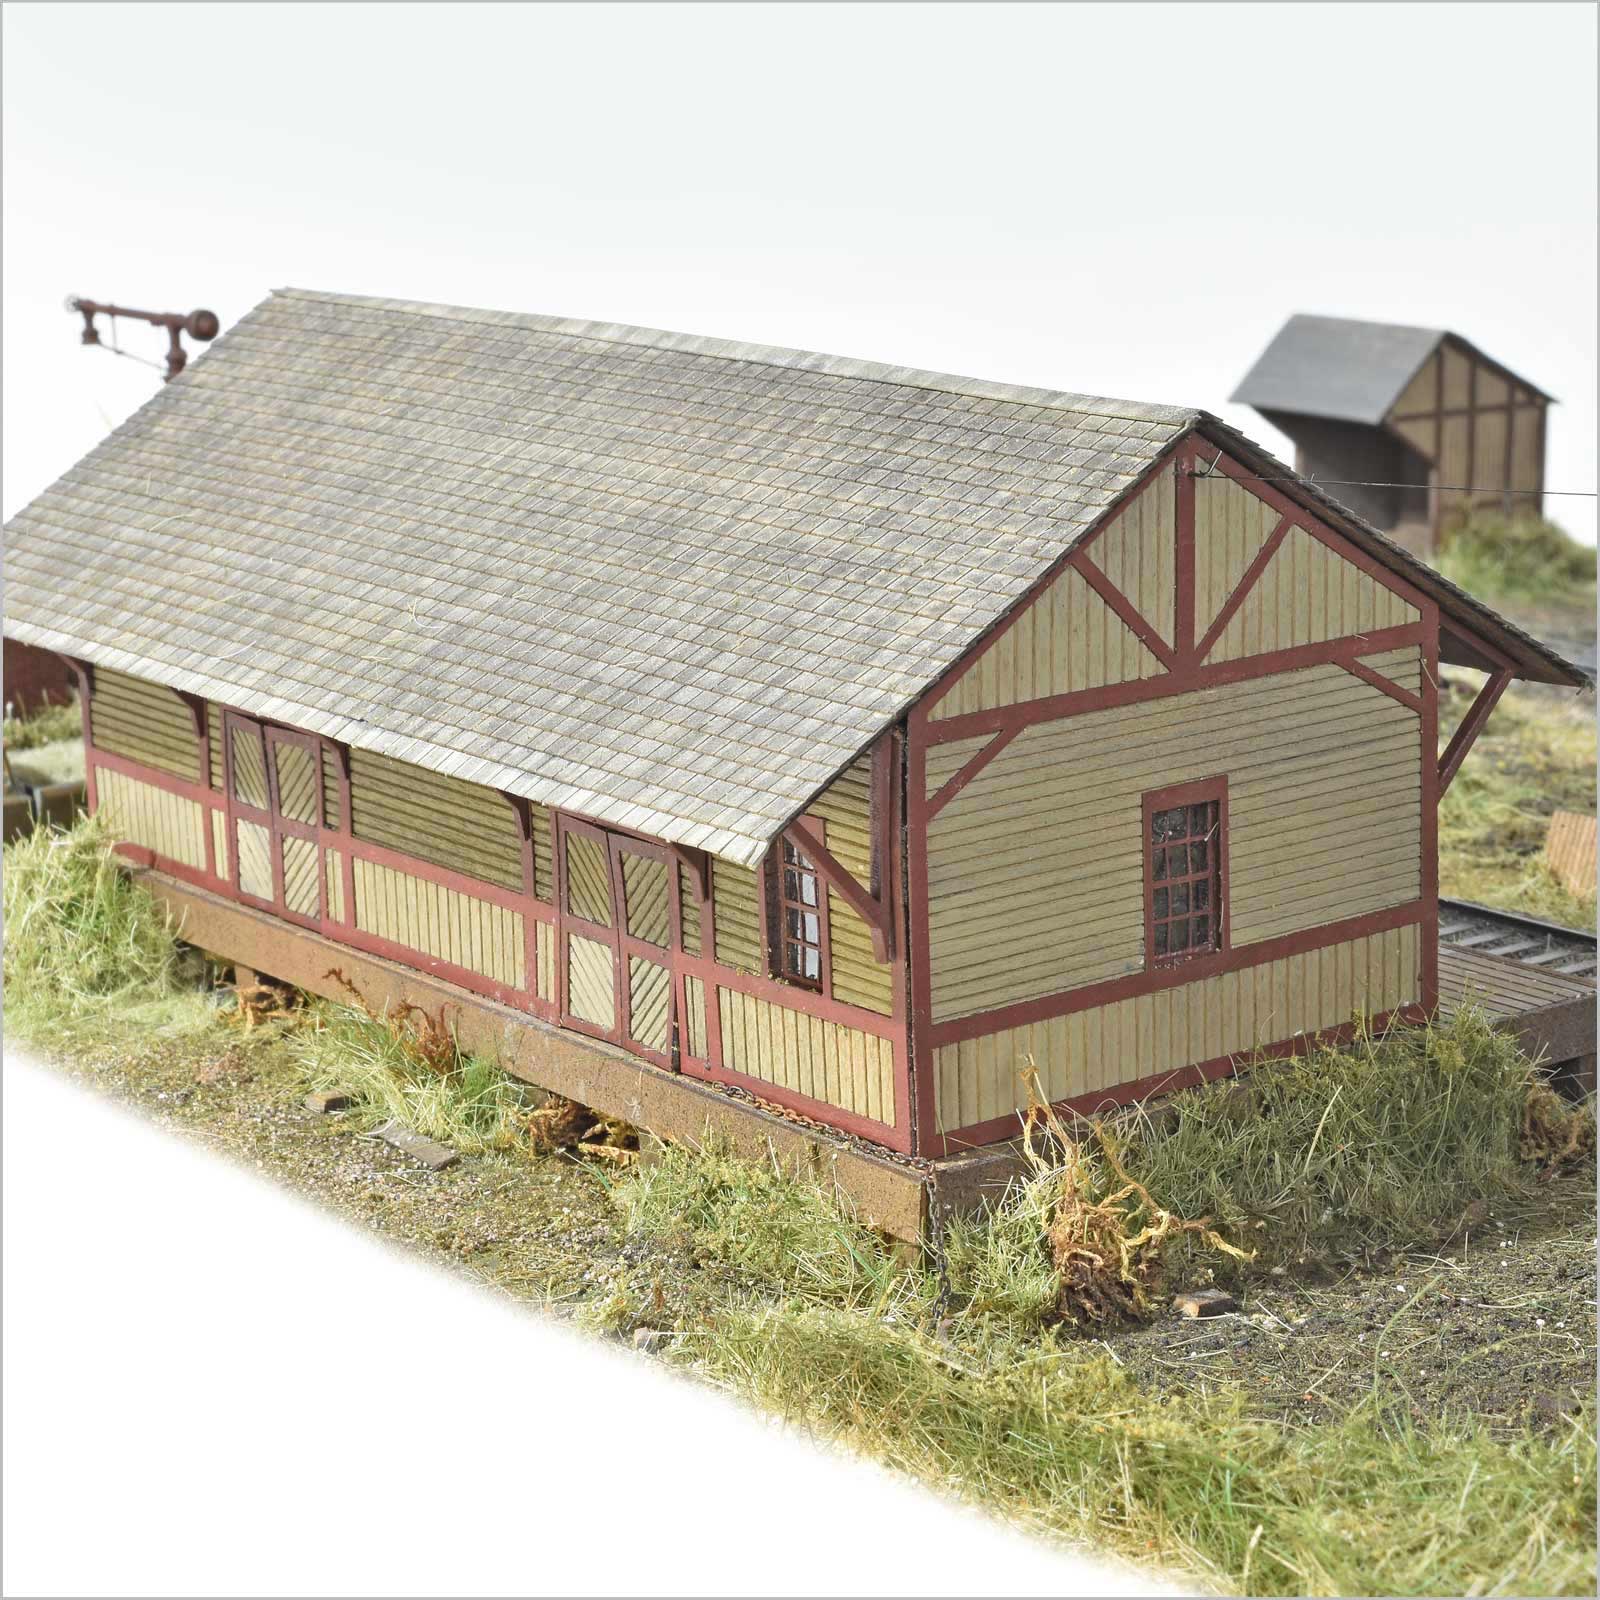 Standard Pennsylvania Railroad Freight Station, HO Scale, by Scientific